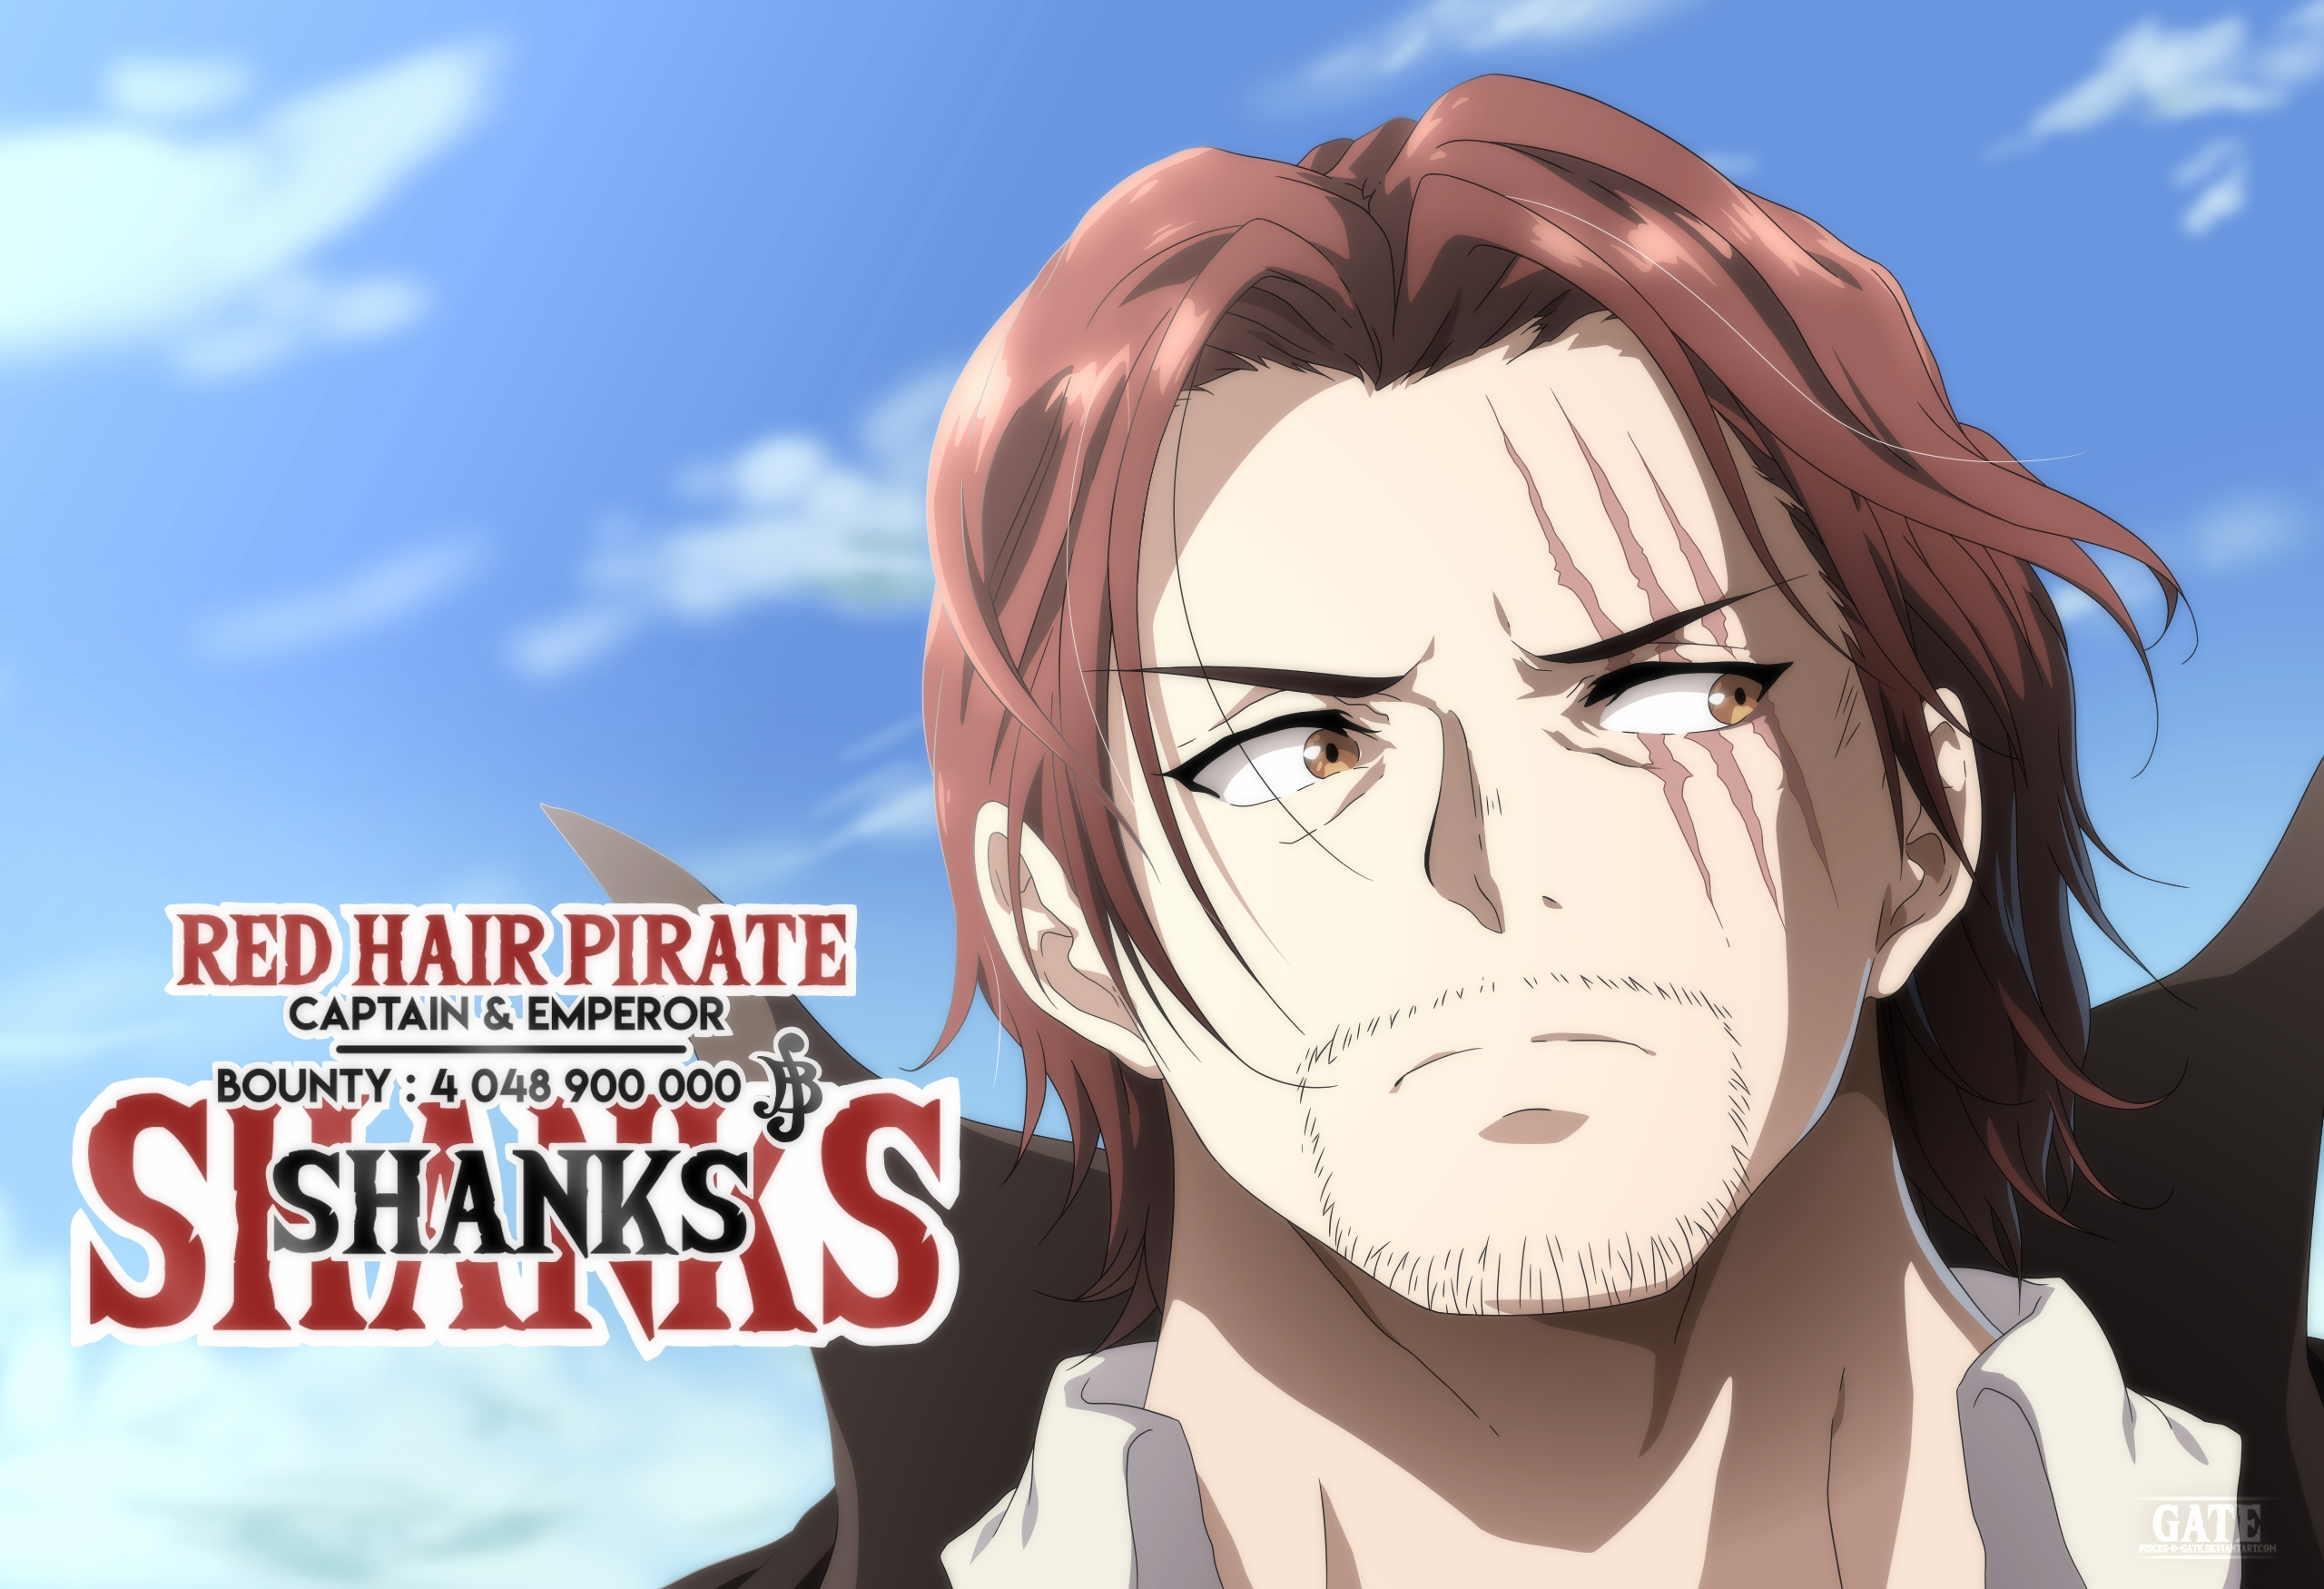 One Piece Chapter 957 Shanks By Pisces D Gate On Deviantart